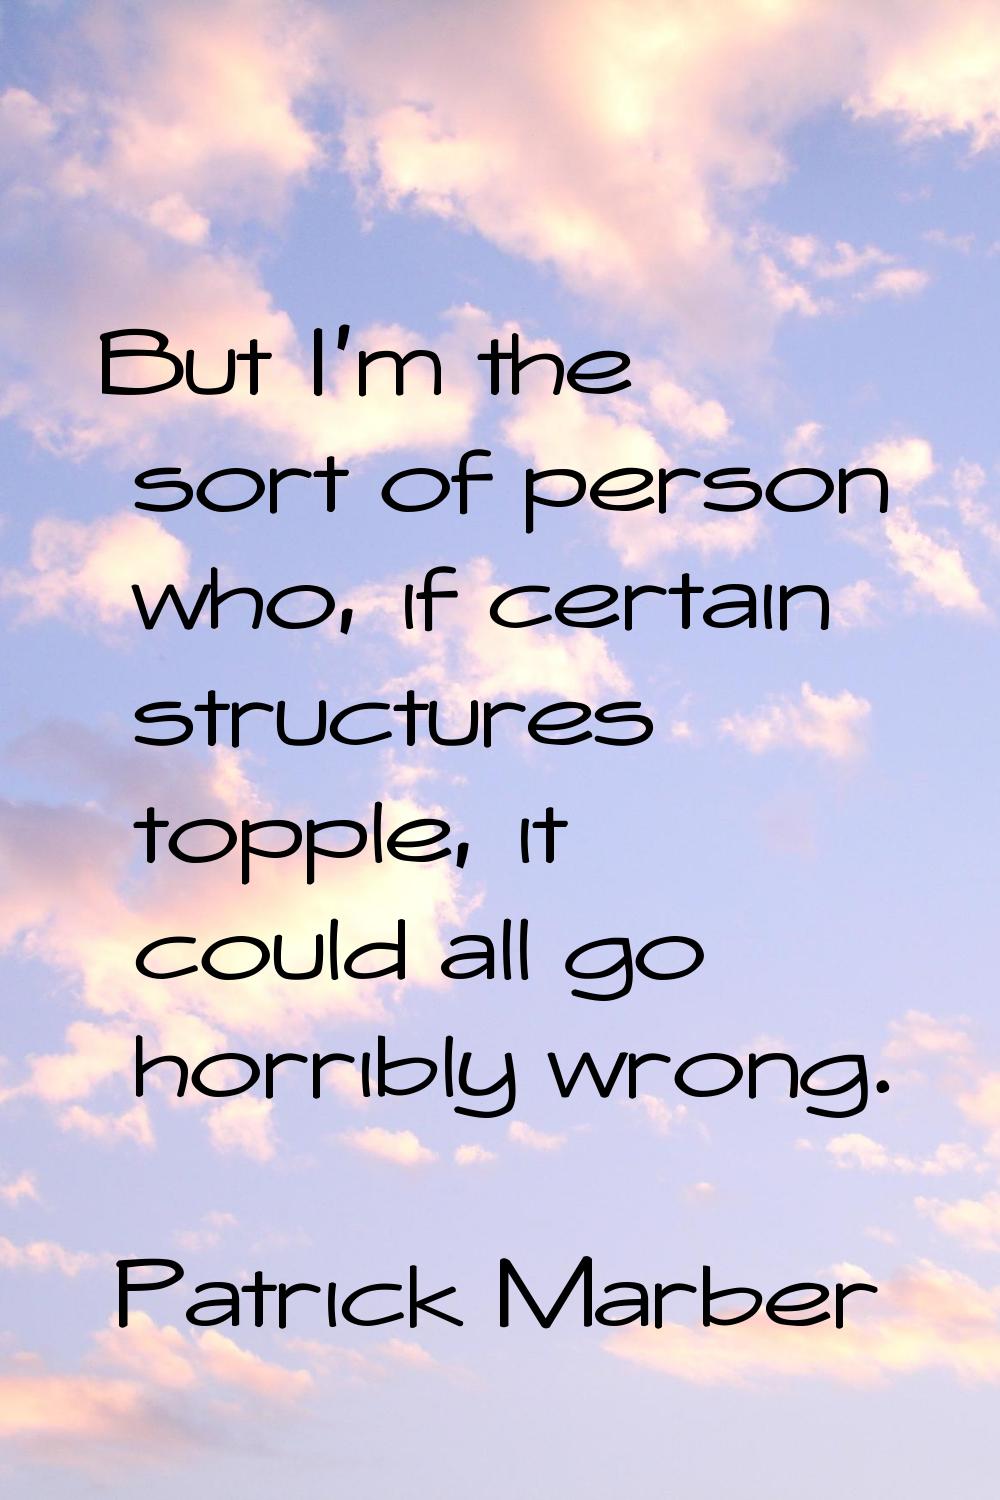 But I'm the sort of person who, if certain structures topple, it could all go horribly wrong.